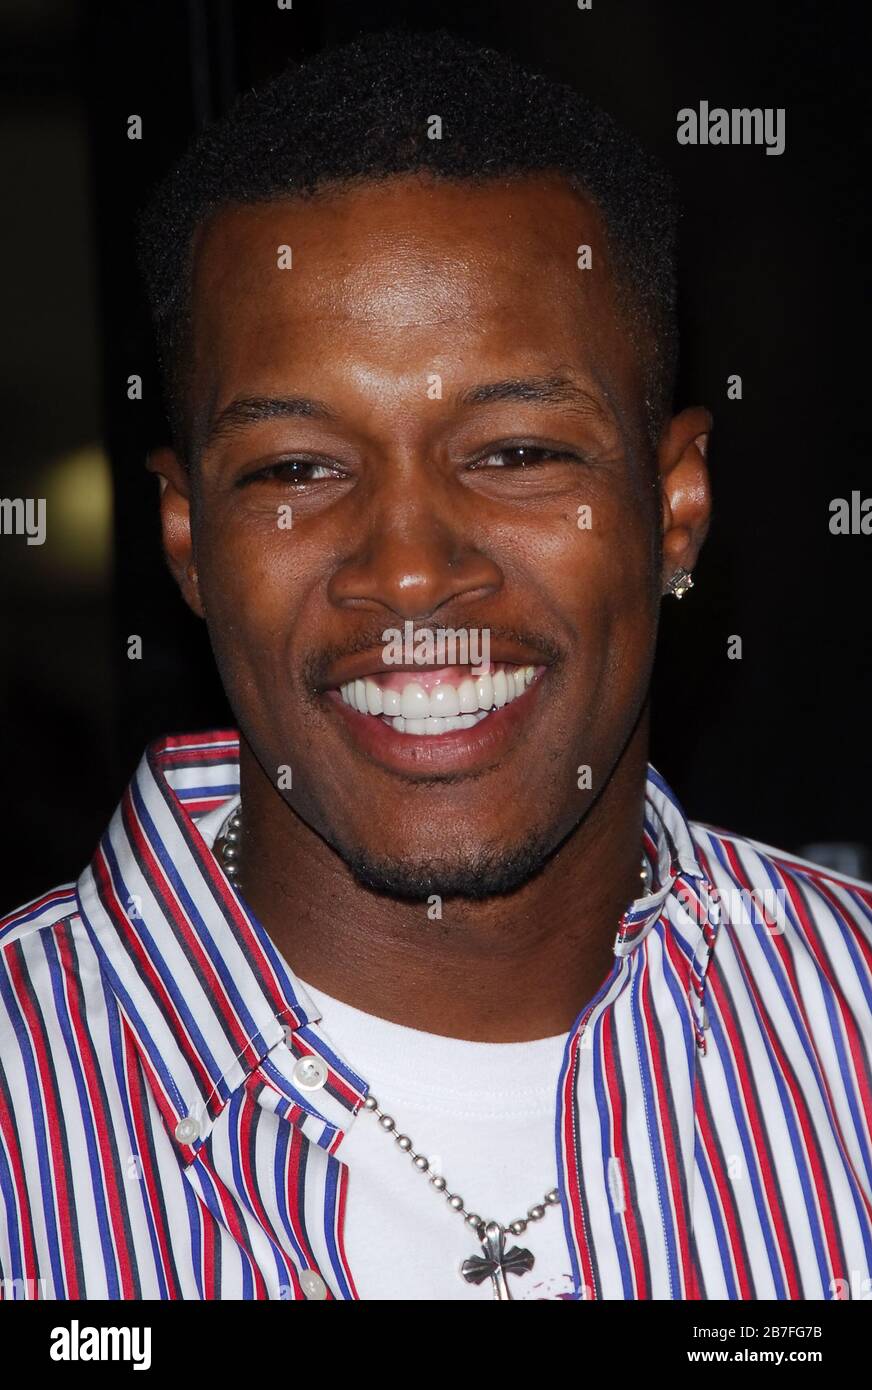 Flex Alexander at the Los Angeles Premiere of 'Snakes On A Plane' held at the Grauman's Chinese Theater in Hollywood, CA. The event took place on Thursday, August 17, 2006.  Photo by: SBM / PictureLux Stock Photo